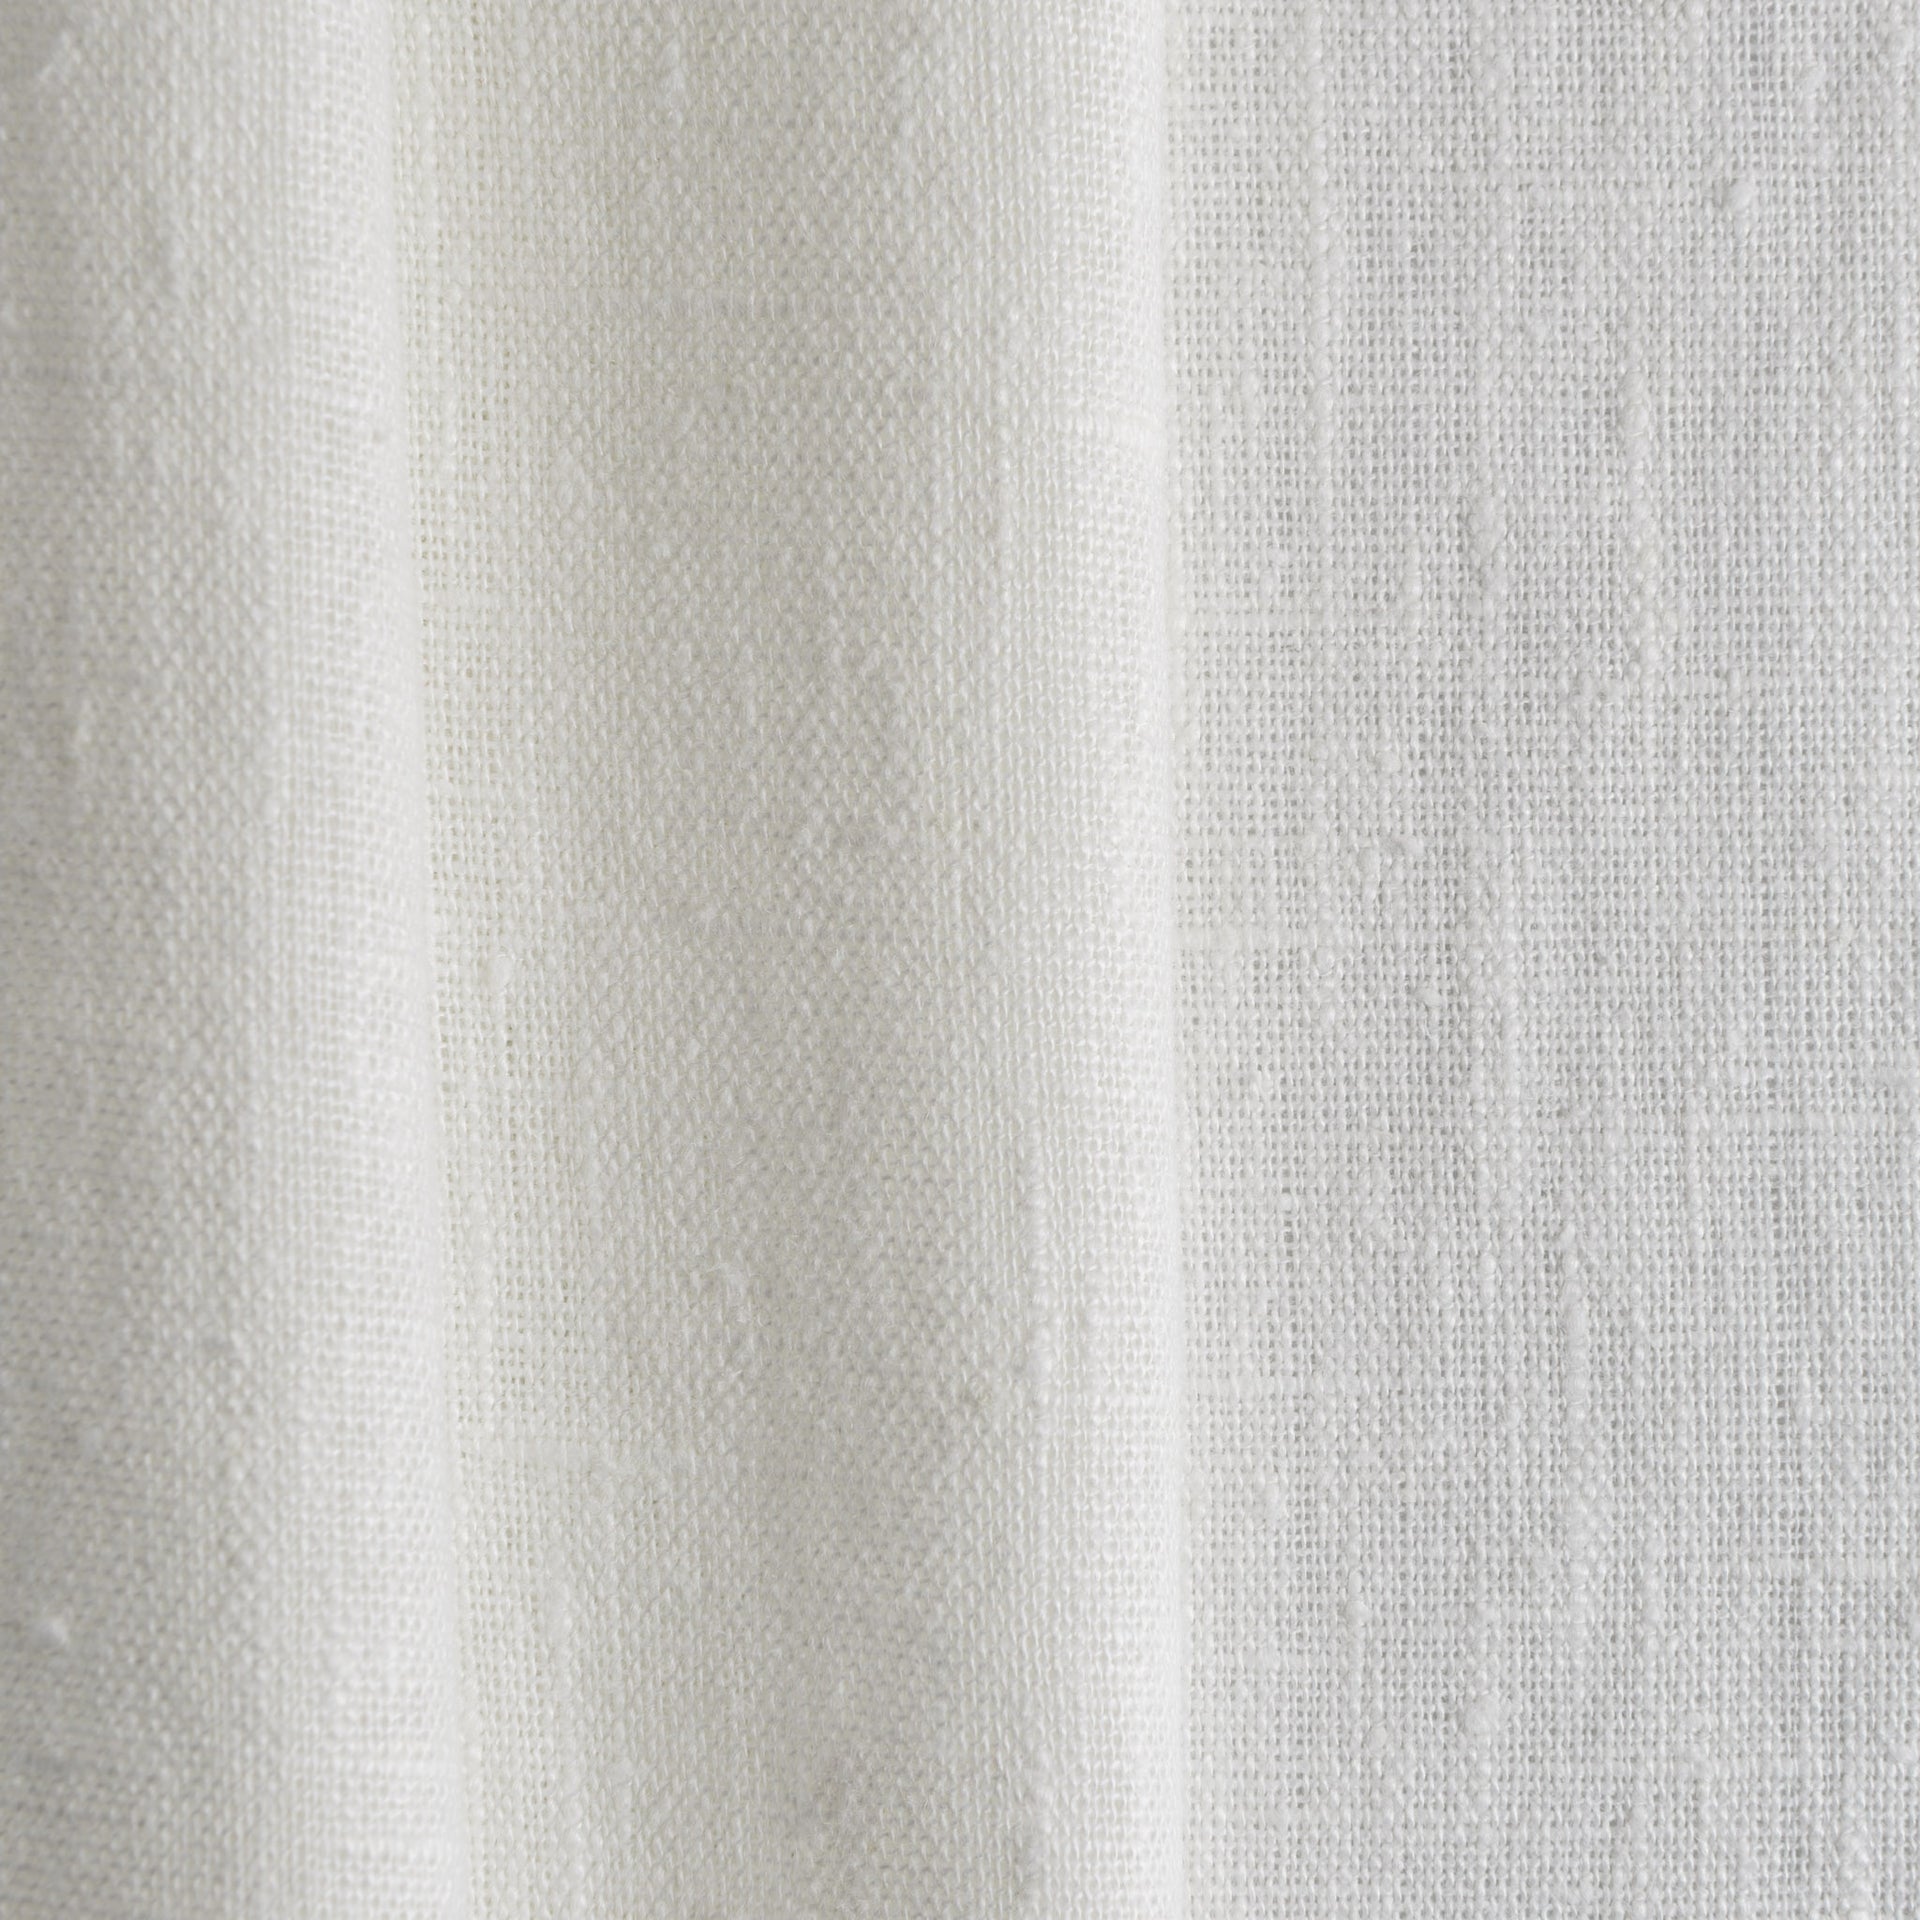 Off-White Heavy Weight Linen Fabric by the Yard - 100% French Natural - Width 52”- 106”